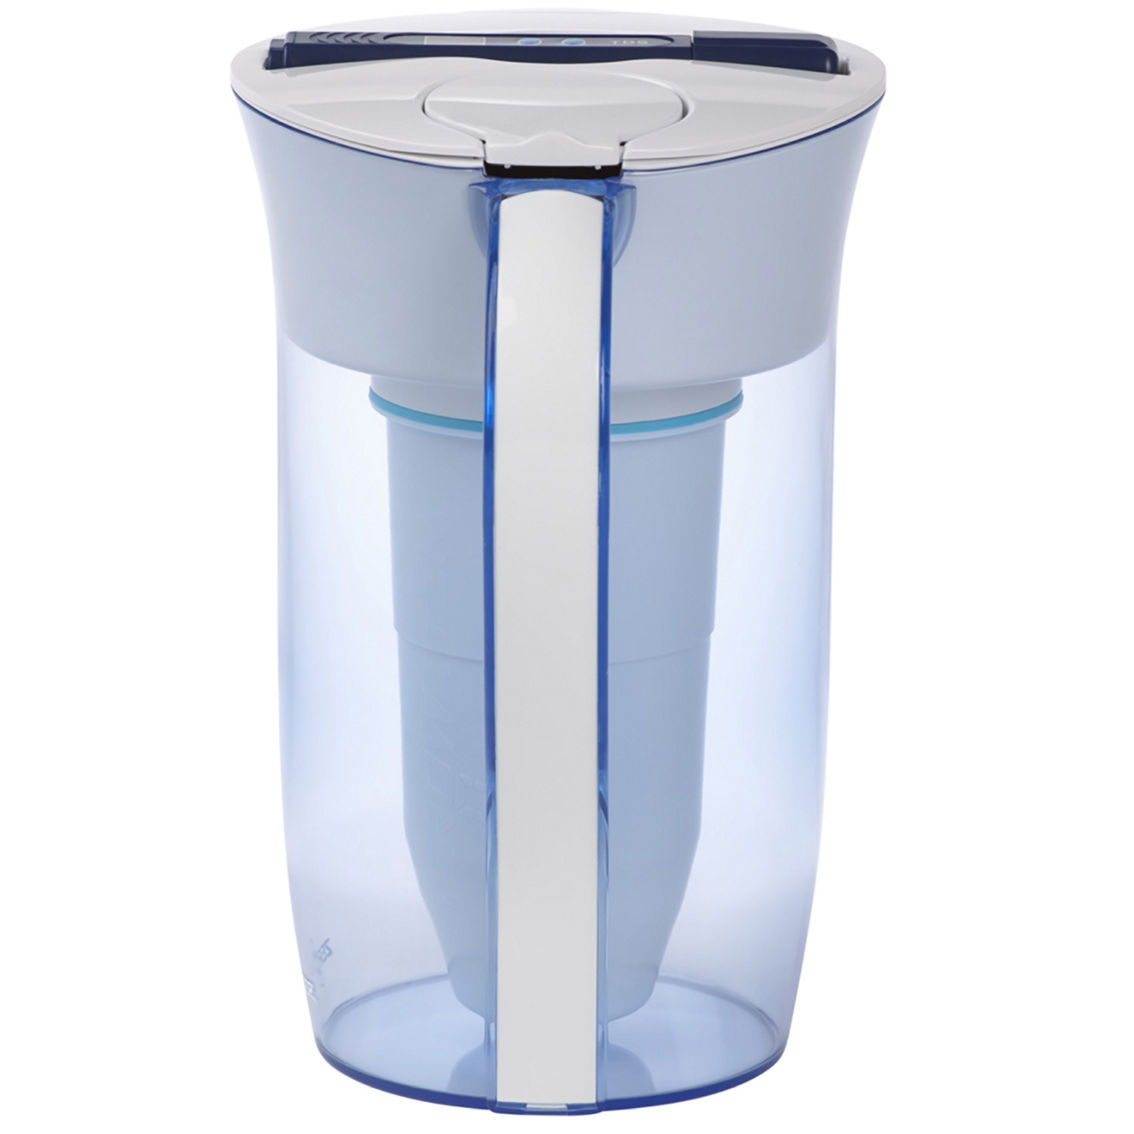 ZeroWater 10 Cup Round Ready Pour Pitcher - Image 3 of 6